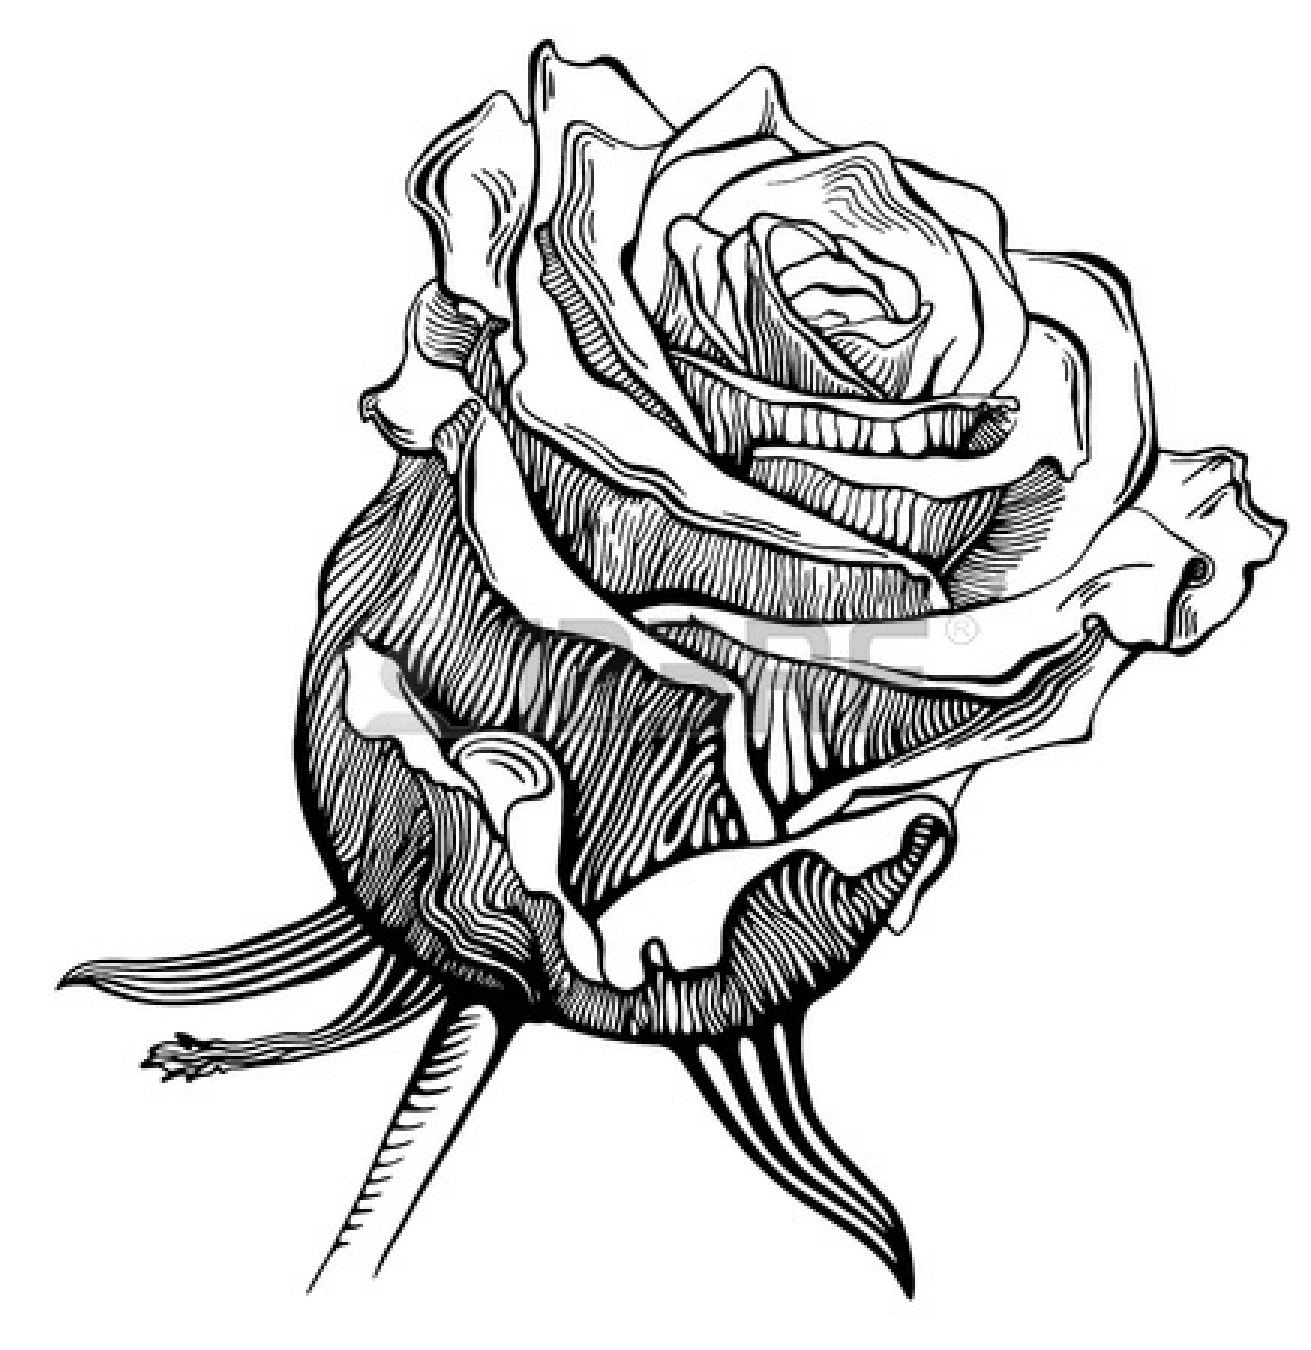 Rose Black And White Drawing Widescreen 2 HD Wallpapers | aduphoto.com